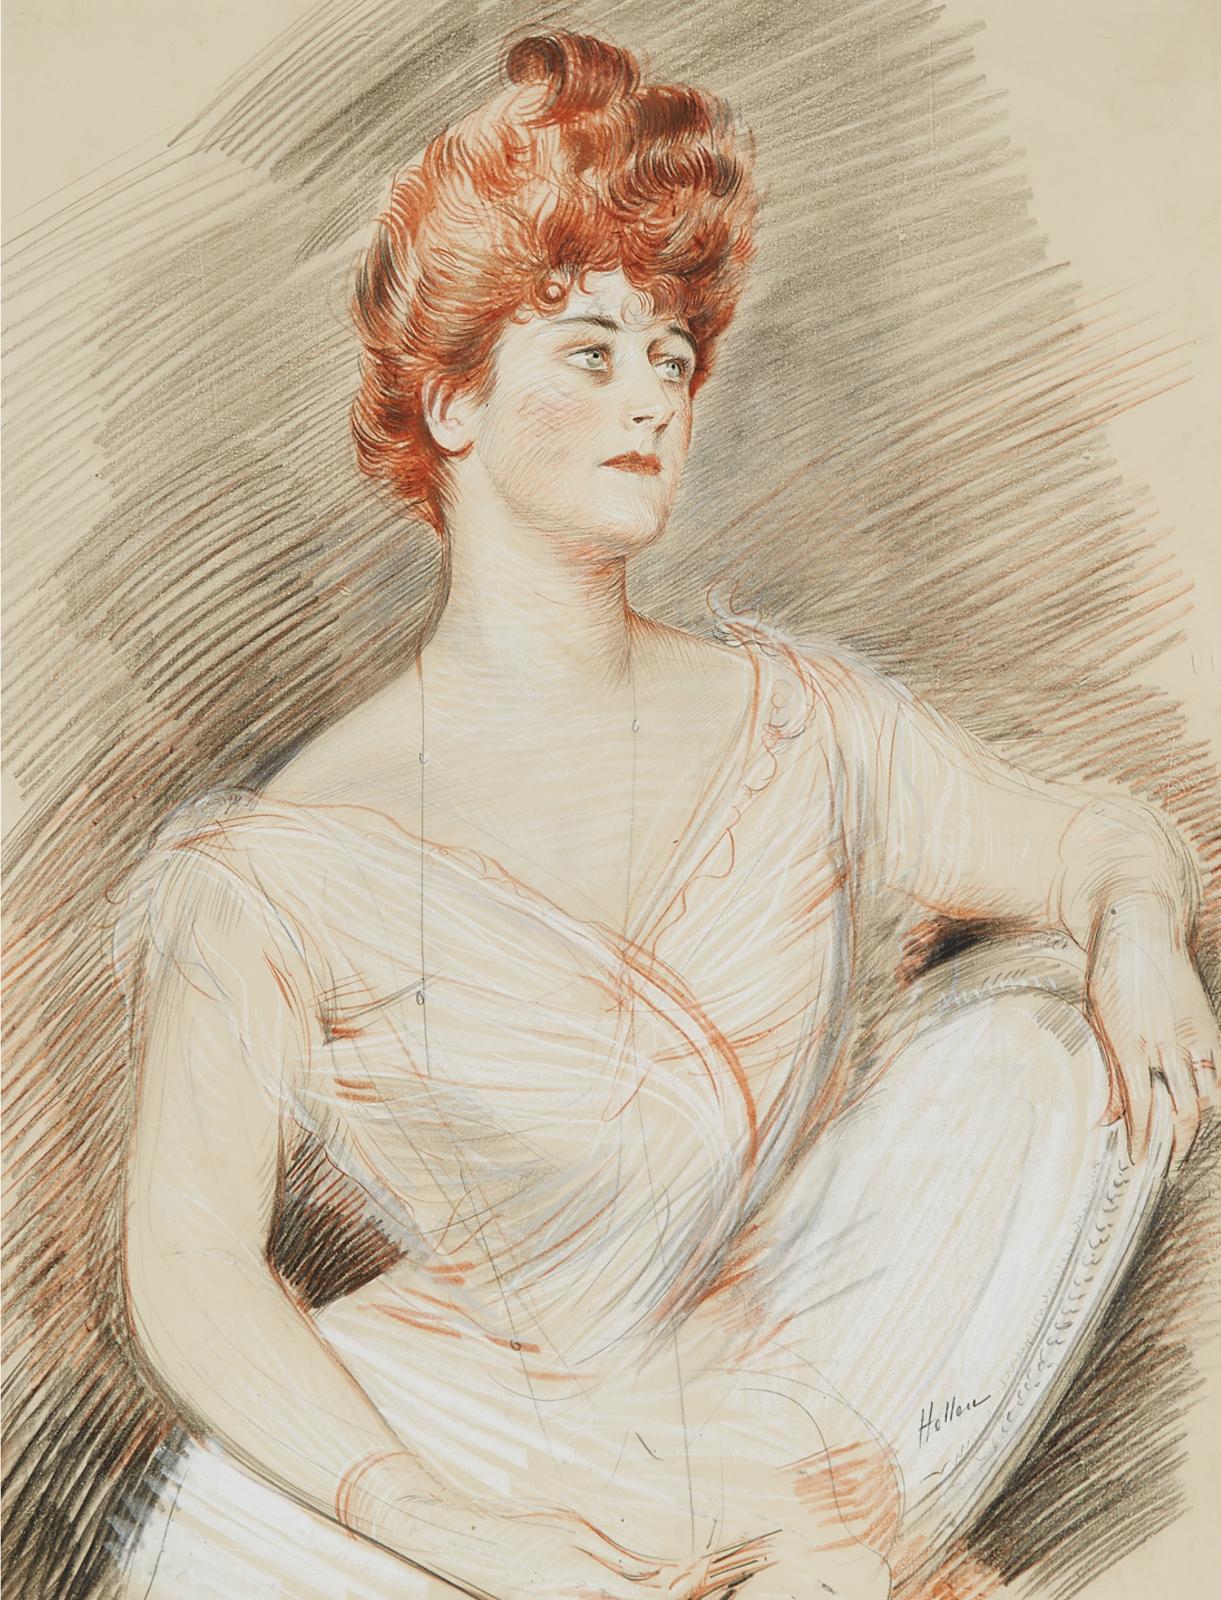 Paul César Helleu (1859-1927) - Elegant Lady With Upswept Red Hair Seated In A Chair